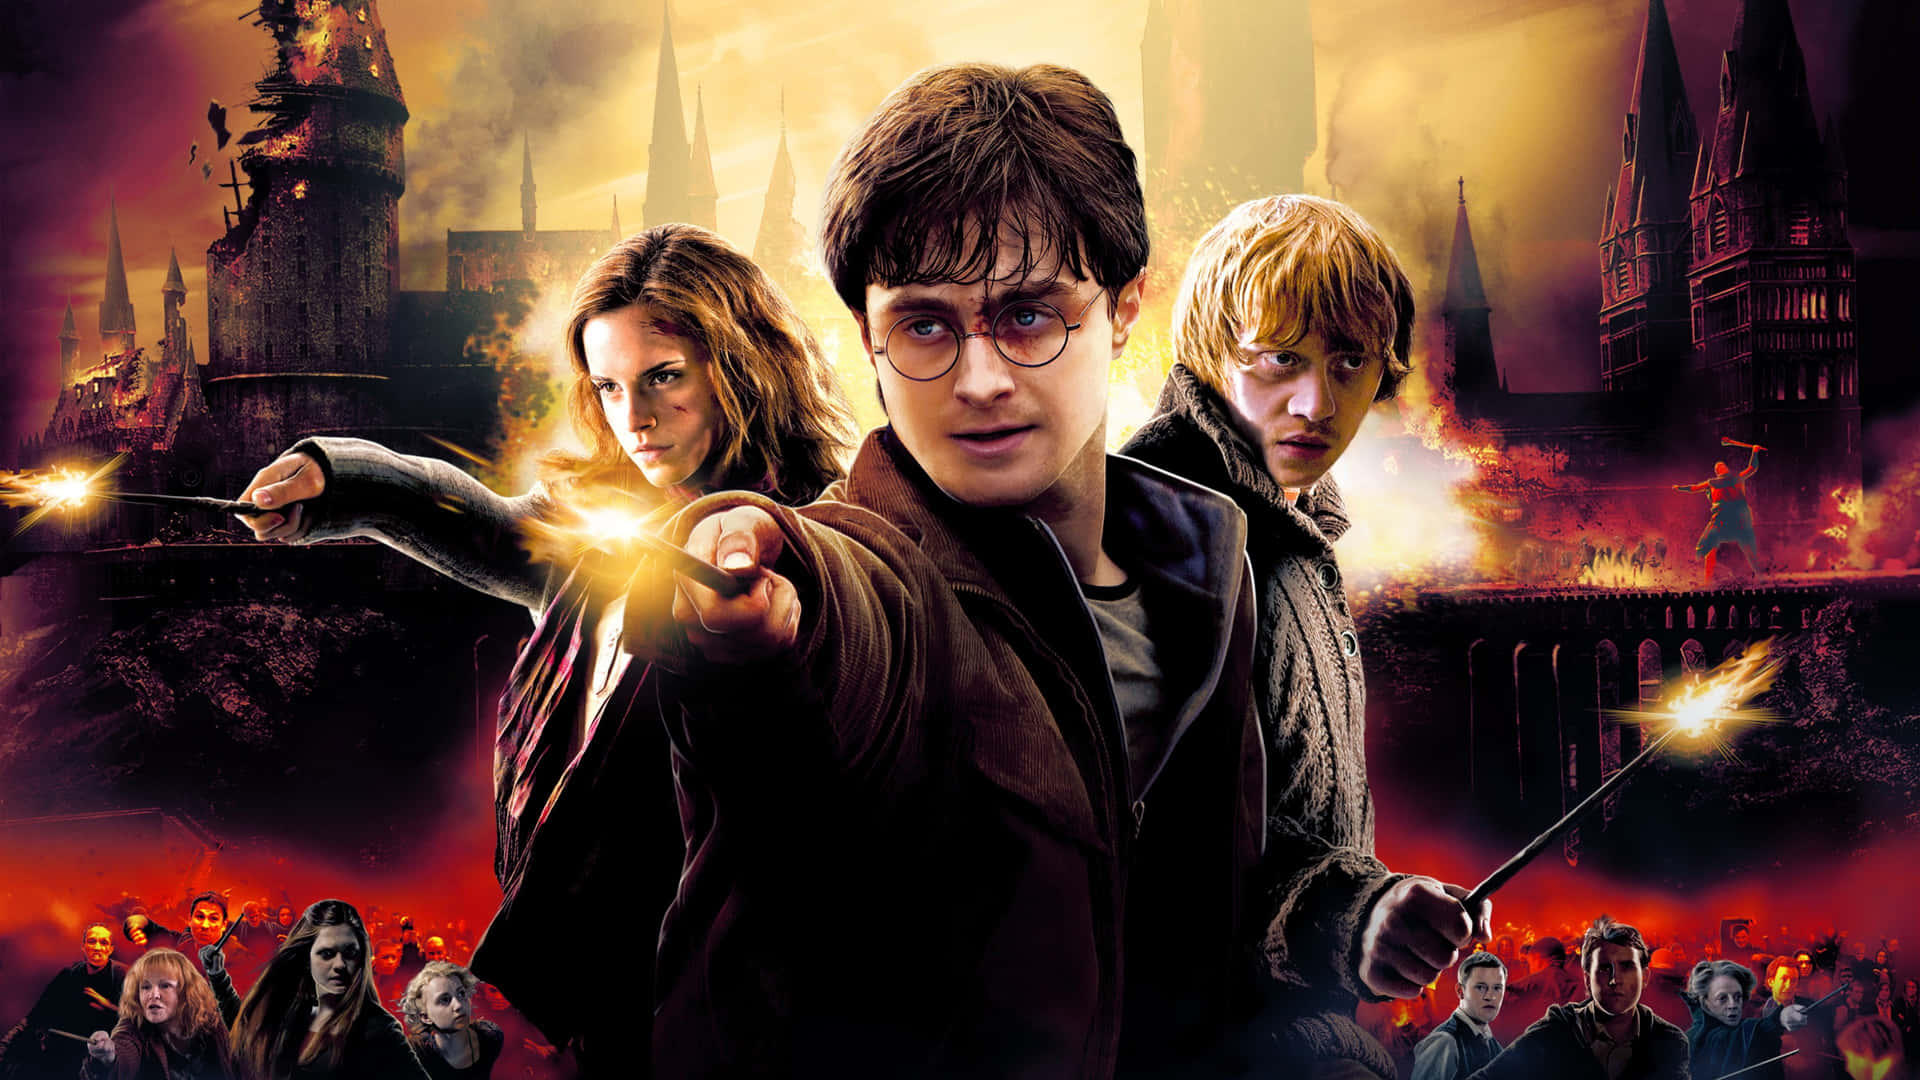 Explore the love between Harry, Ron and Hermione with the Golden Trio! Wallpaper